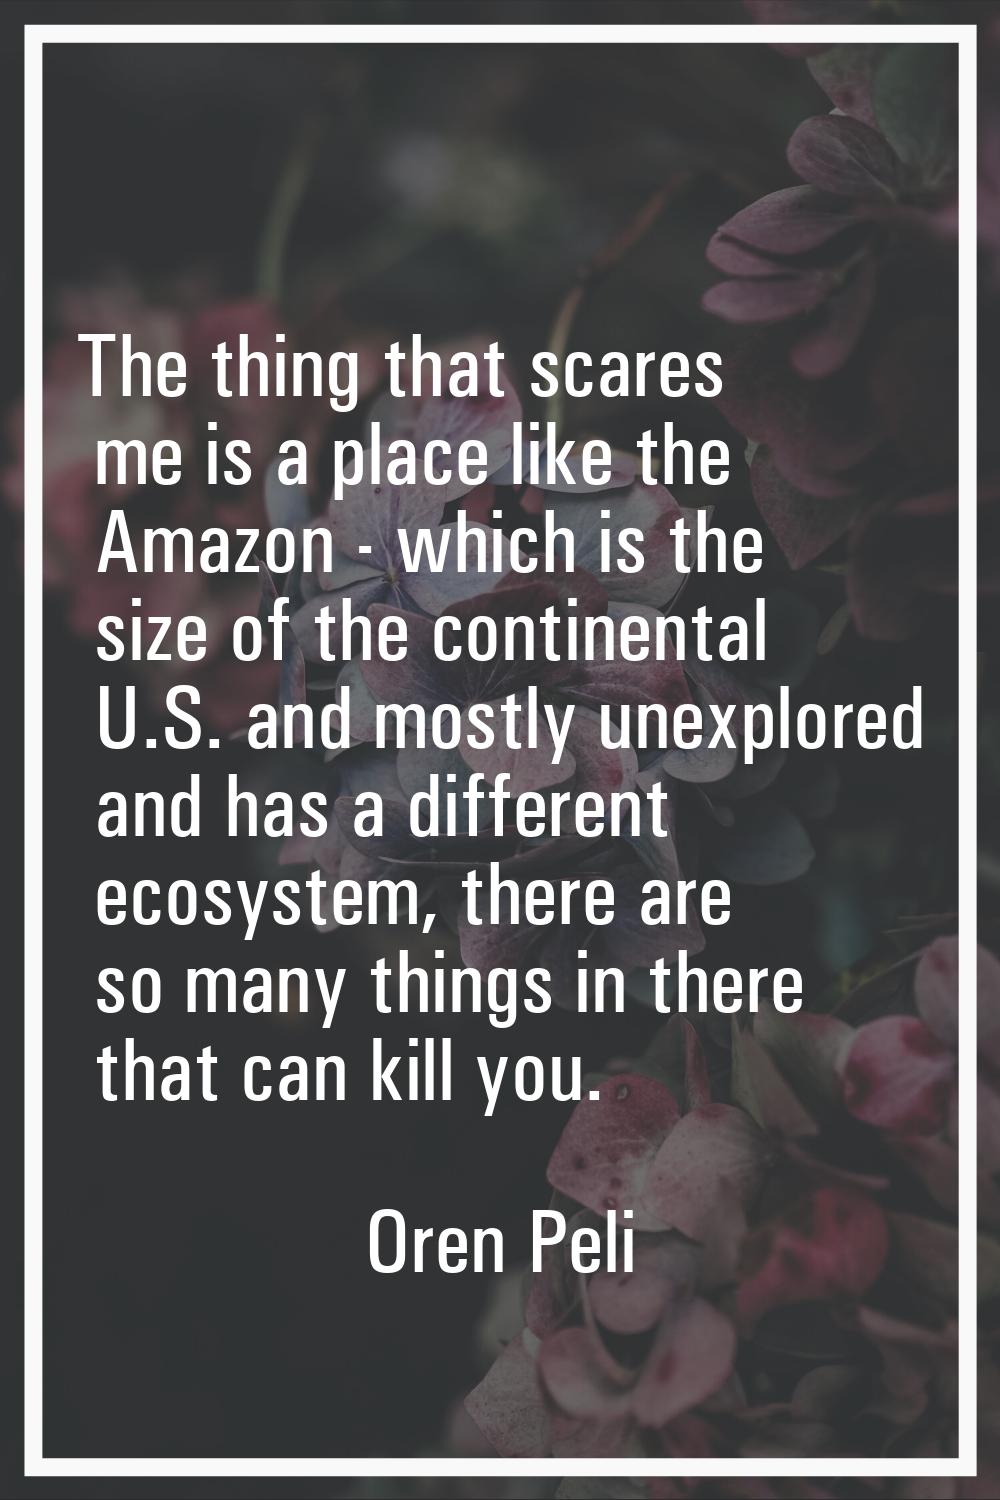 The thing that scares me is a place like the Amazon - which is the size of the continental U.S. and